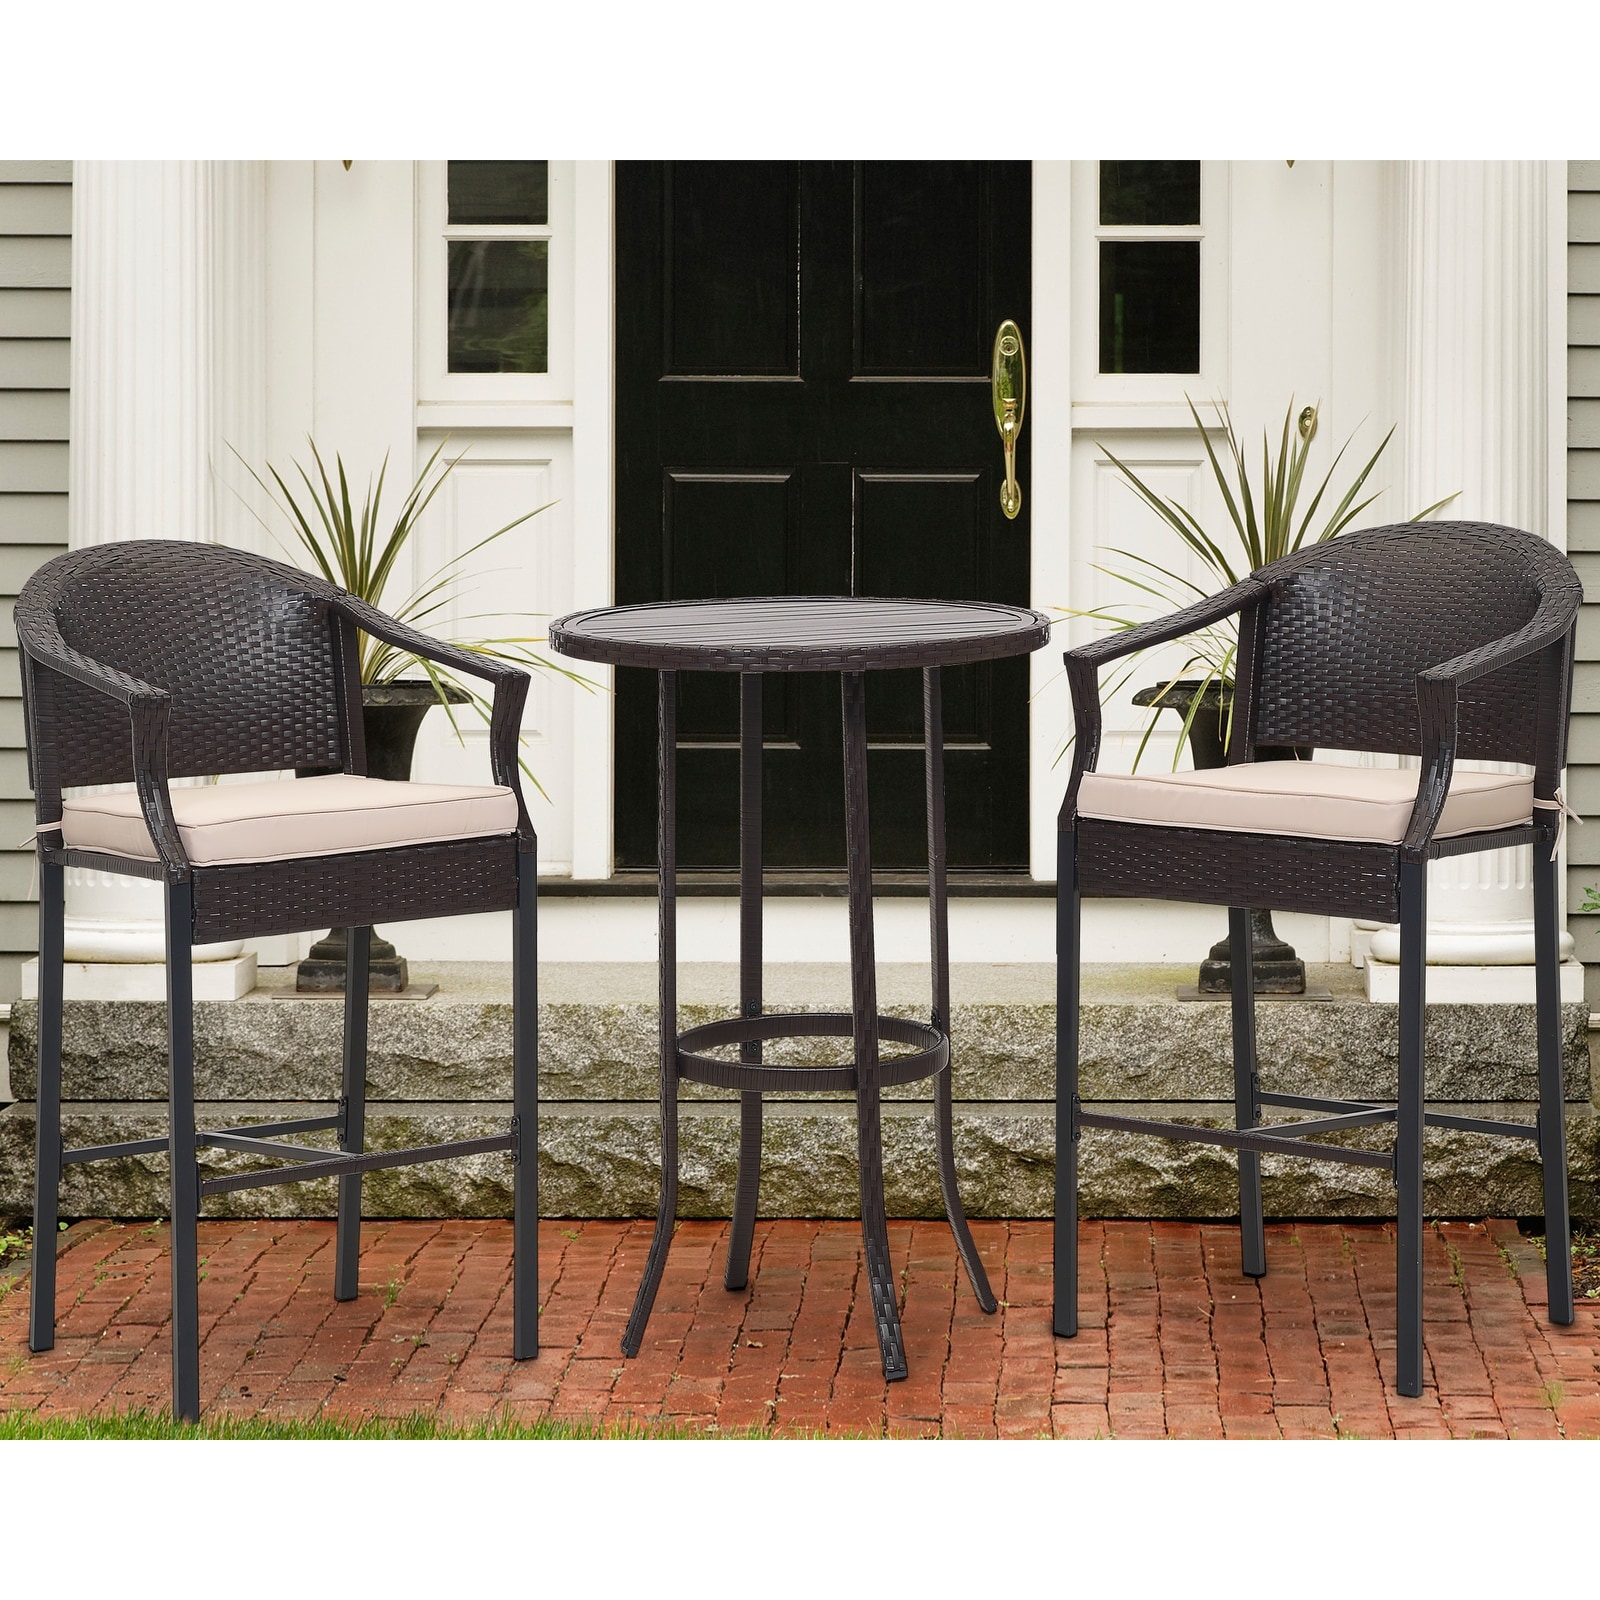 3-piece Outdoor Wicker Patio Bar Stools With Table Set